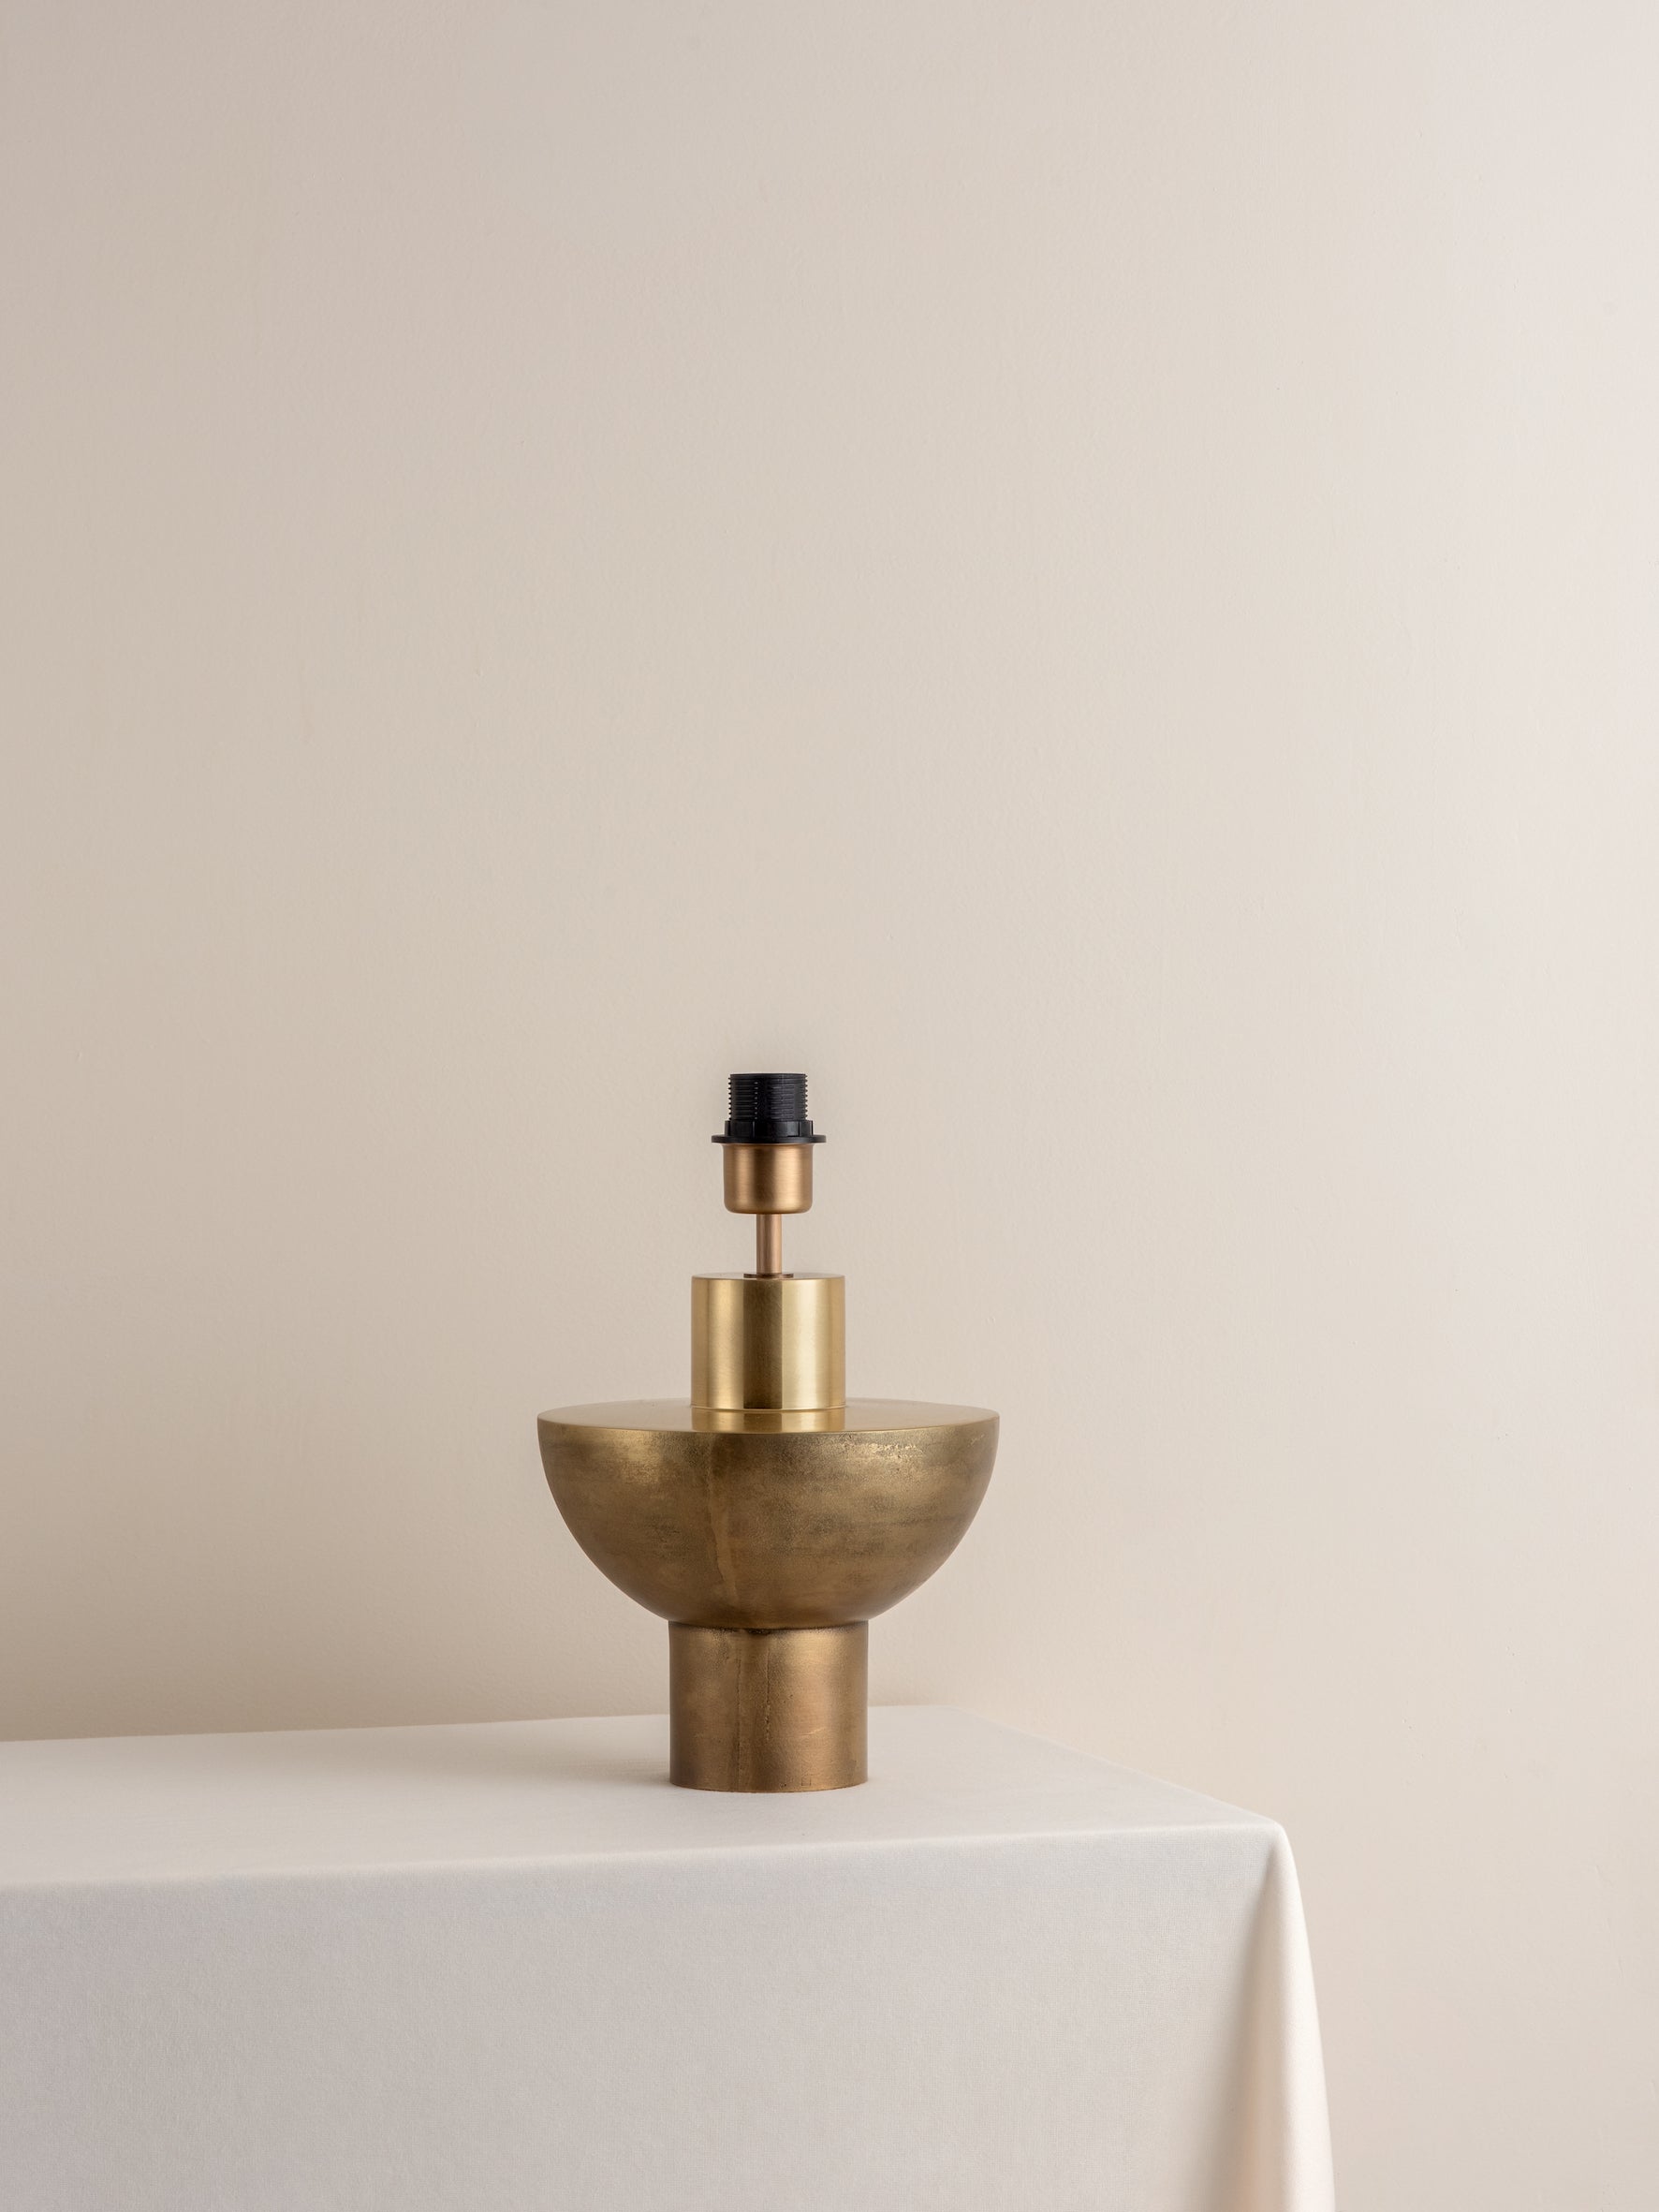 Editions brass lamp with + chrome shade | Table Lamp | Lights & Lamps Inc | Modern Affordable Designer Lighting | USA